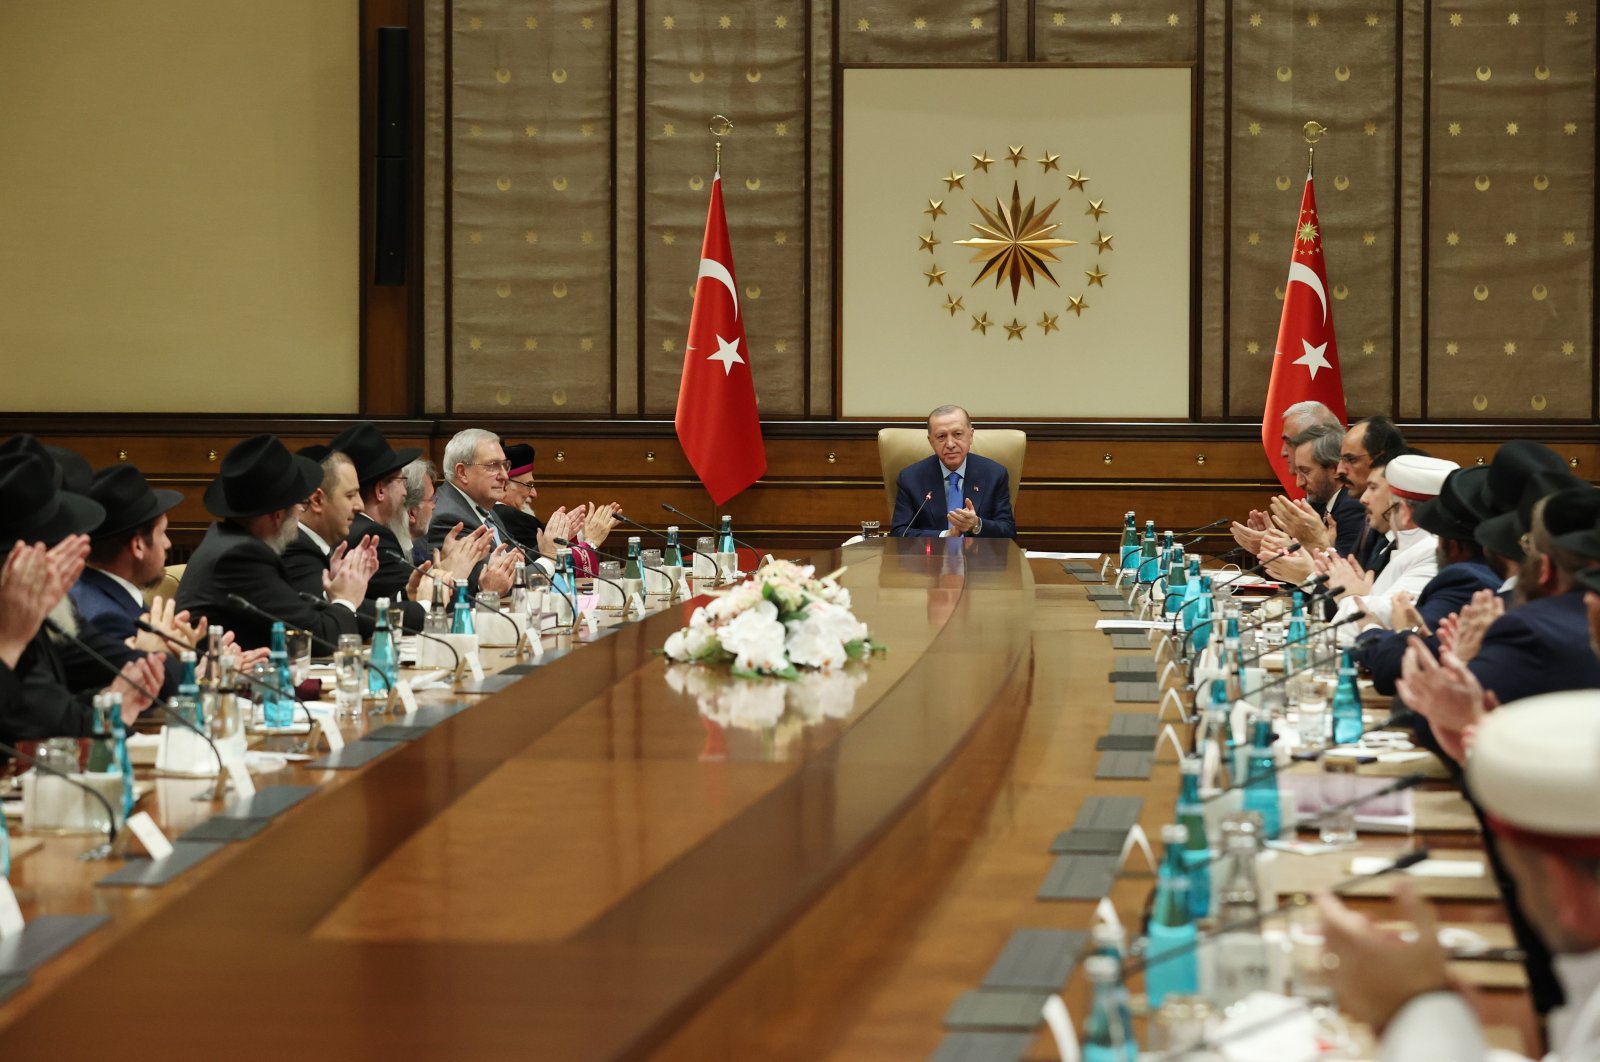 President Recep Tayyip Erdoğan attends a meeting with representatives of the Jewish community of Türkiye and rabbis from abroad at the Presidential Complex, in the capital Ankara, Türkiye, Dec. 22, 2021. (İHA Photo)